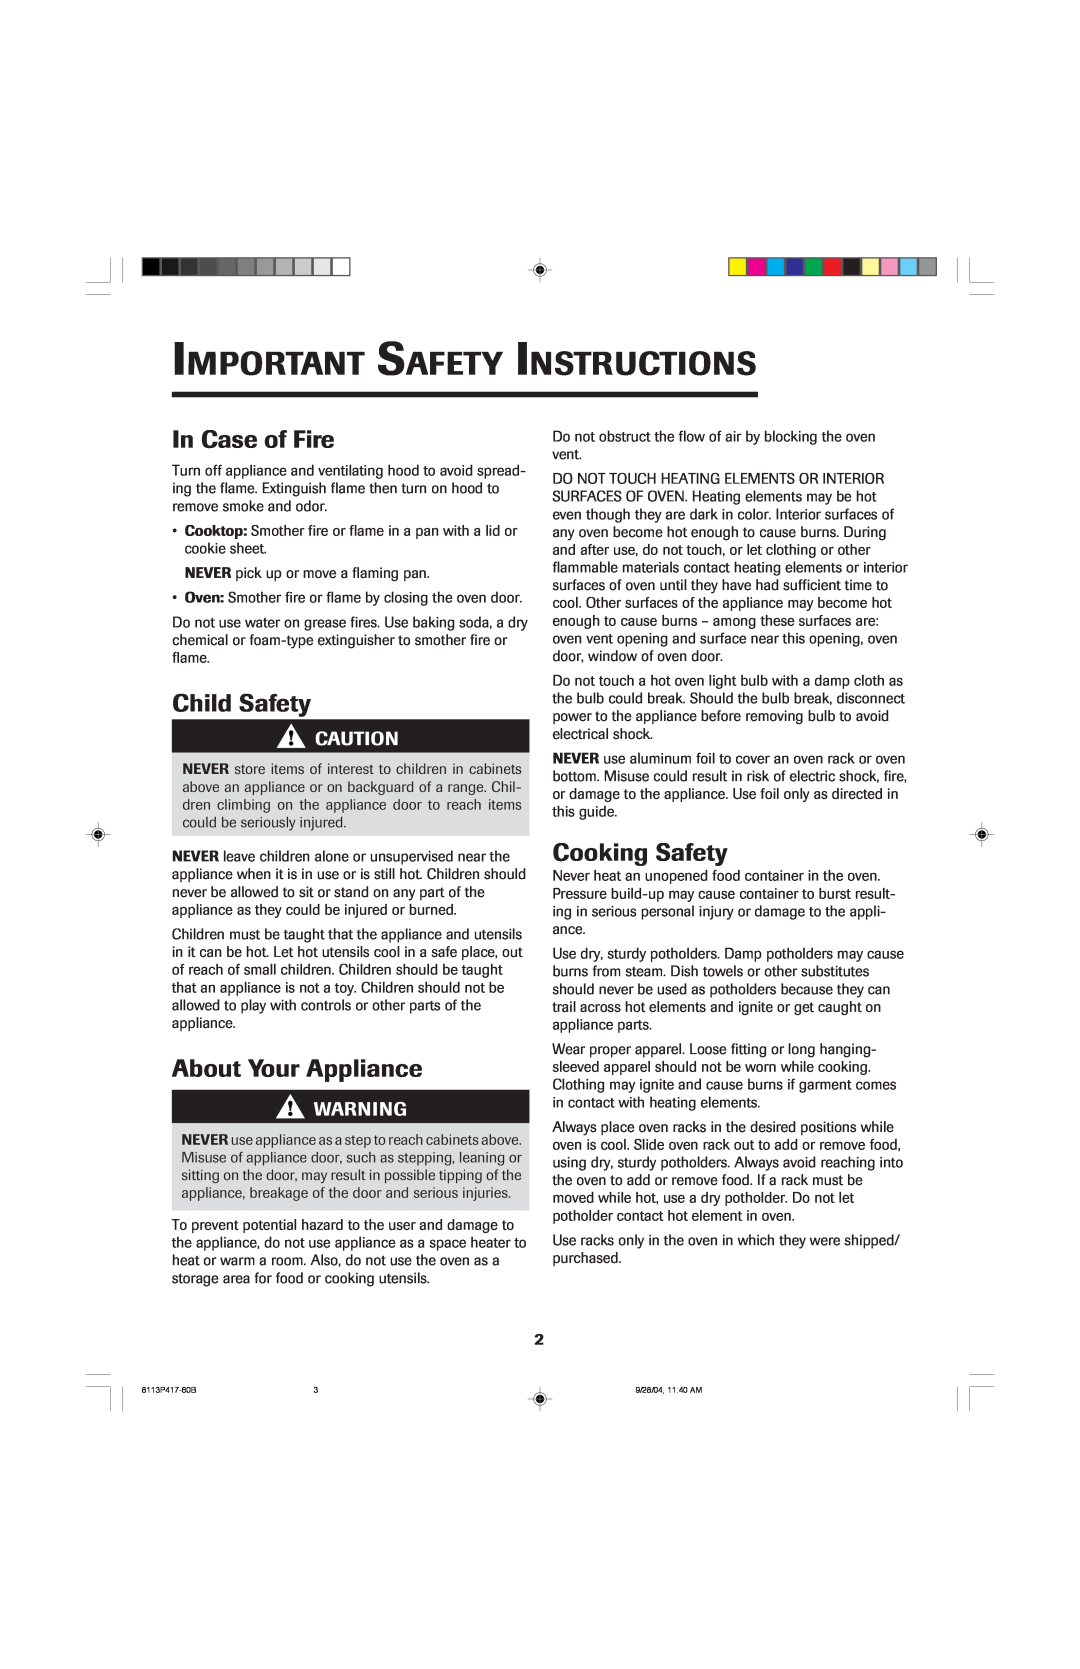 Jenn-Air 800 Important Safety Instructions, In Case of Fire, Child Safety, About Your Appliance, Cooking Safety 